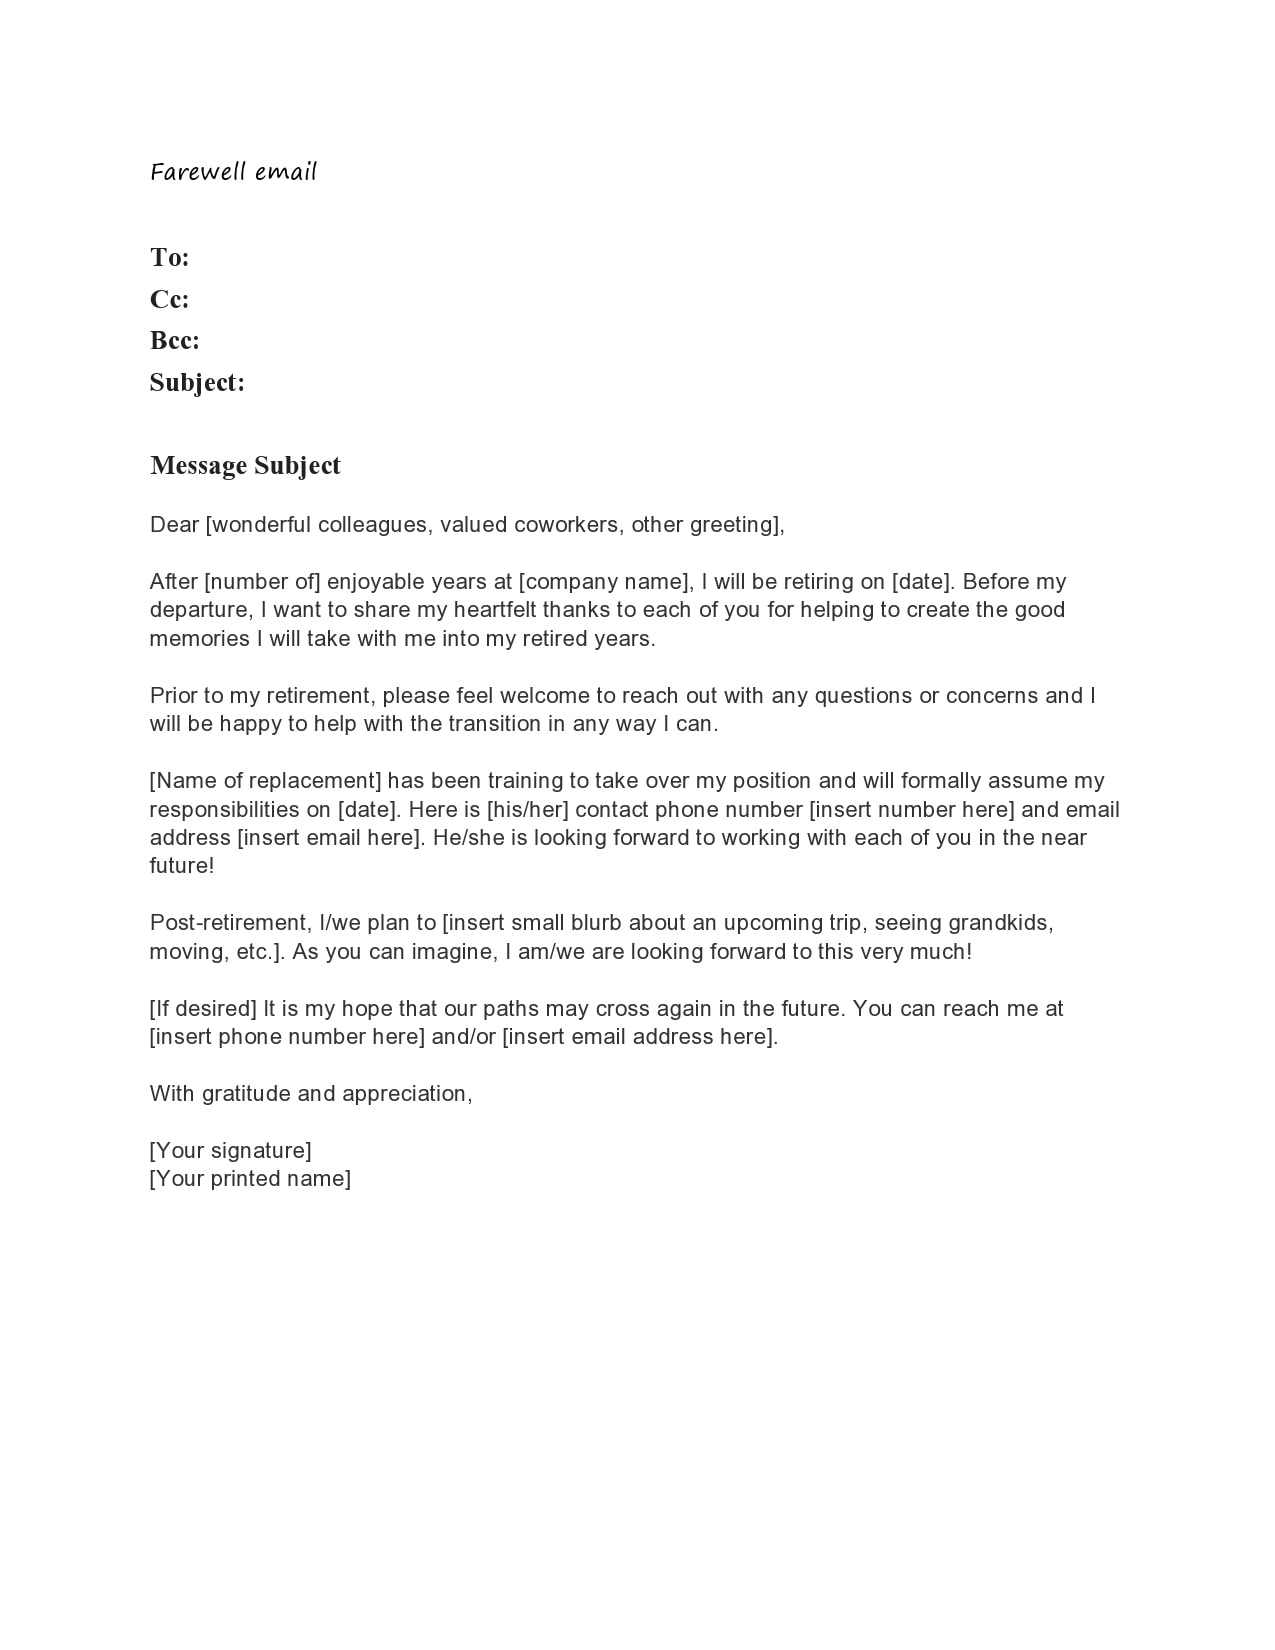 Retirement Letter To Colleagues from templatearchive.com